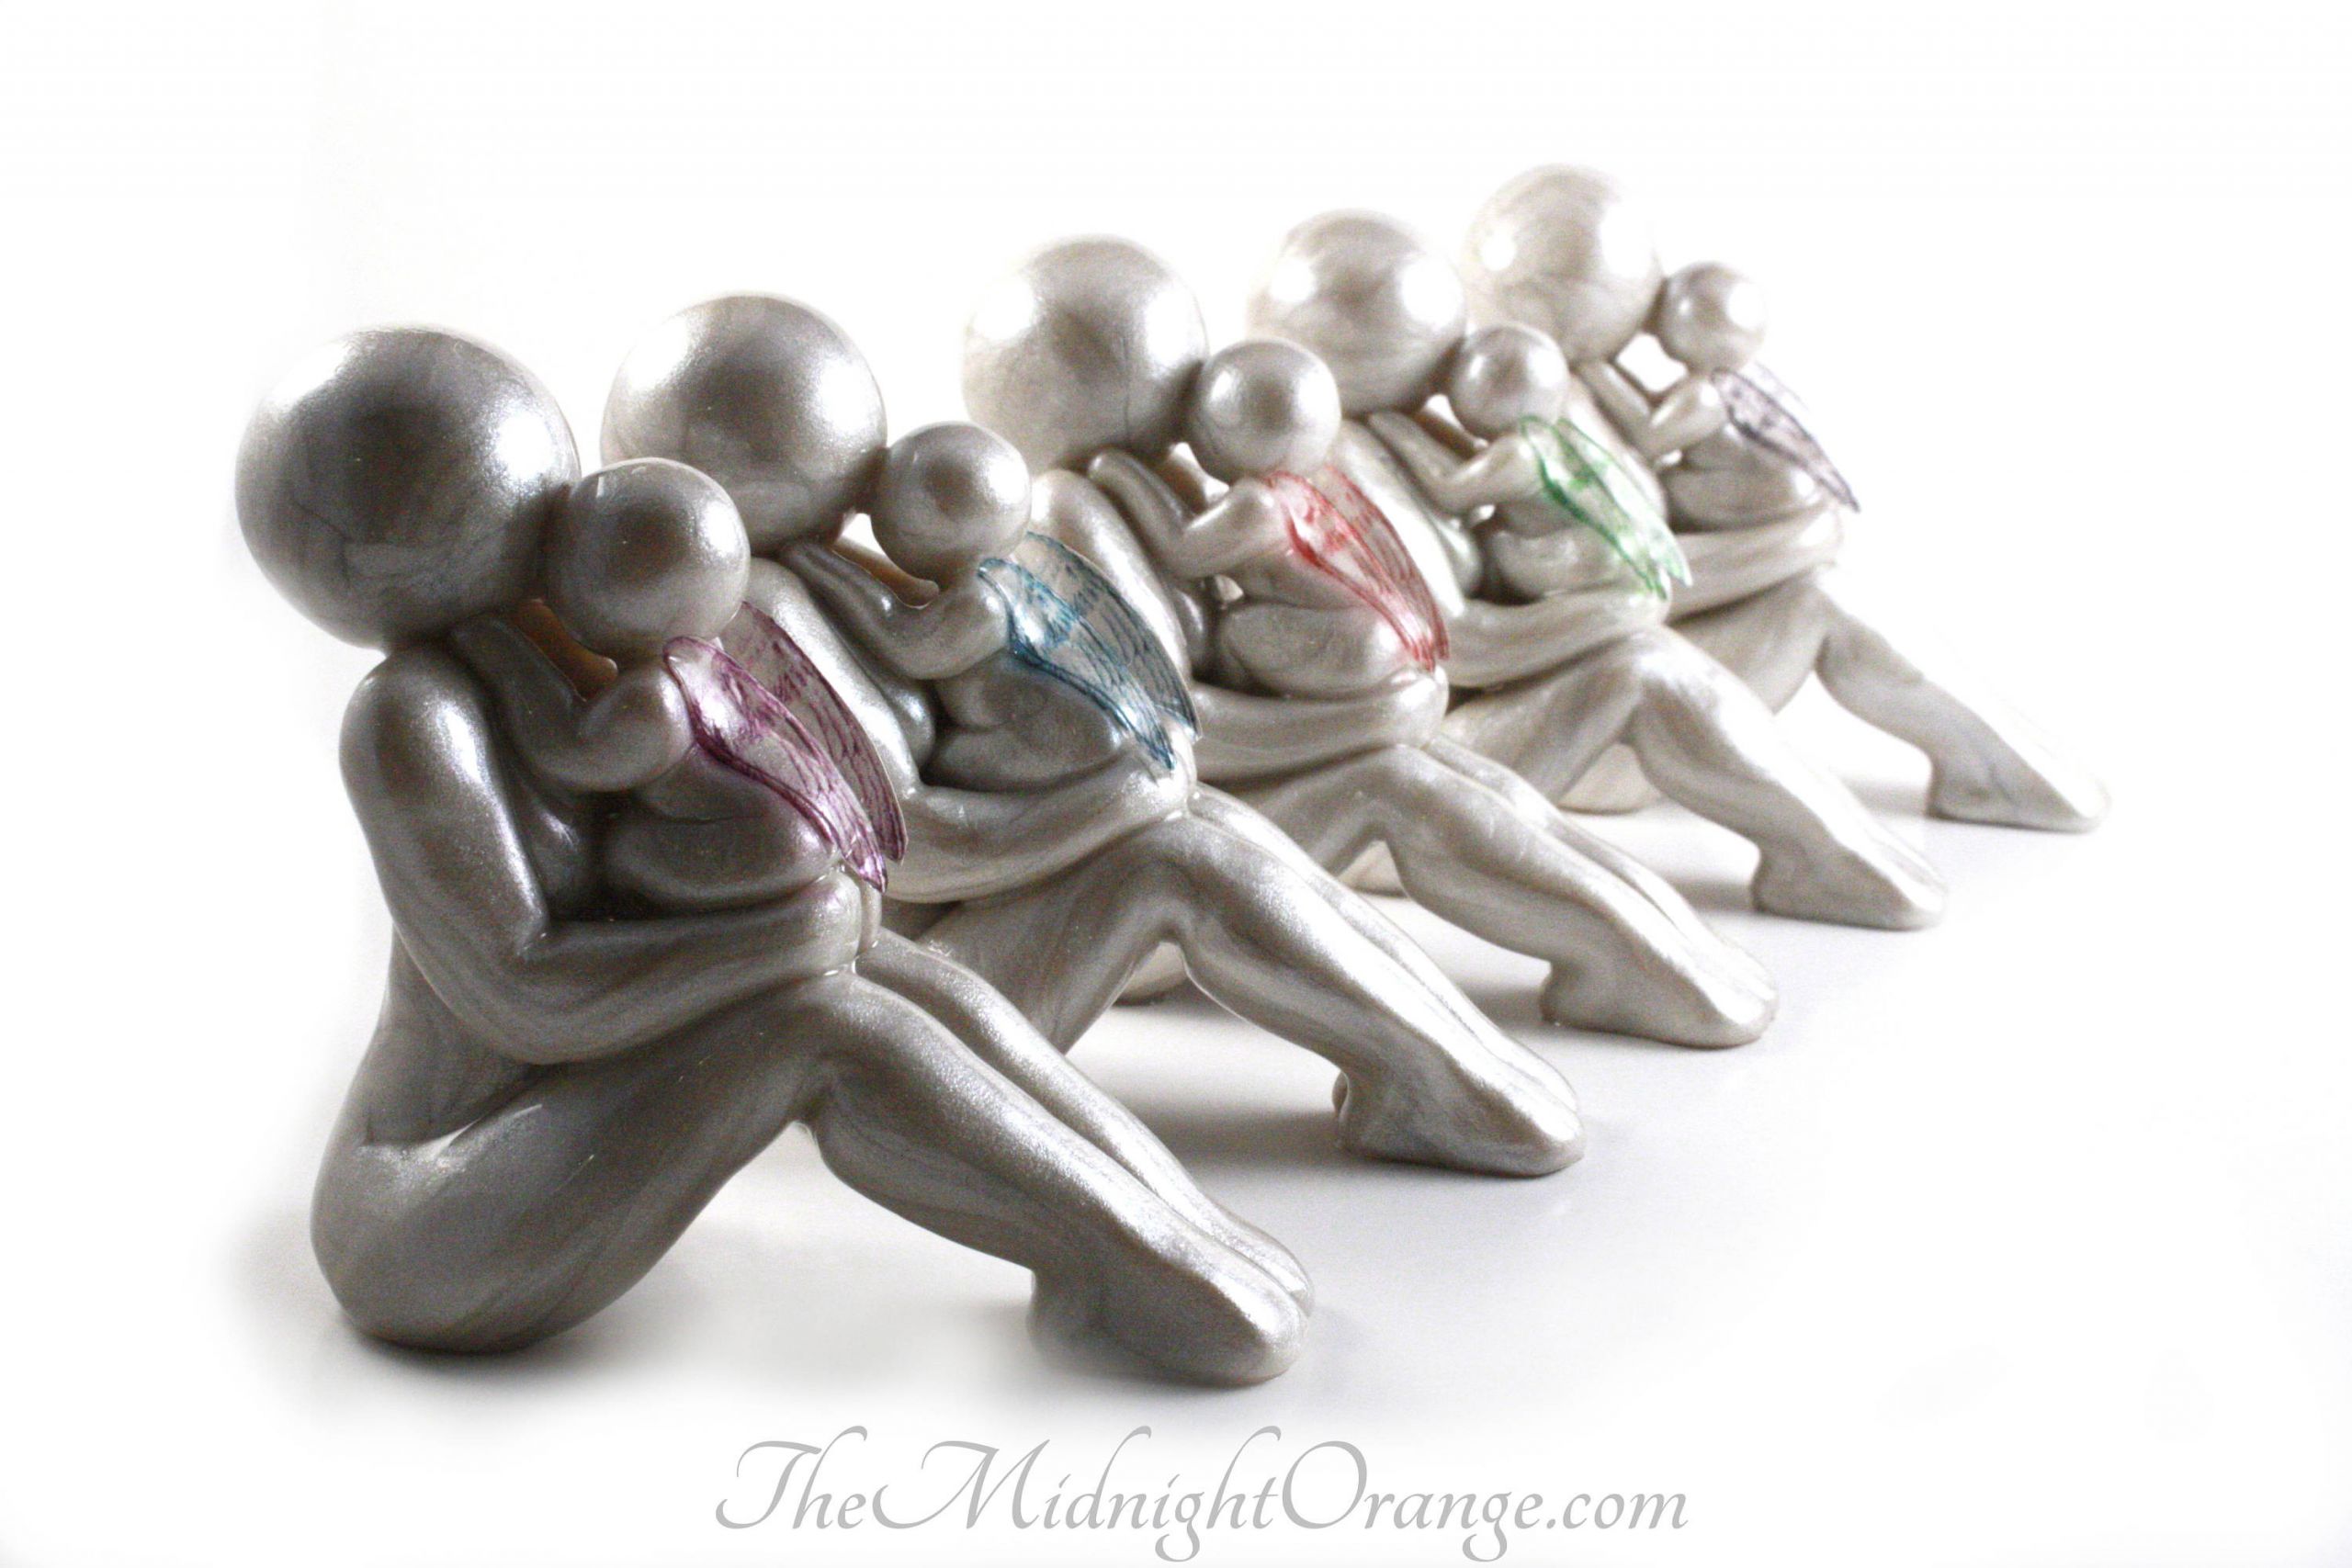 Sympathy Gifts For Loss Of Baby
 Mother and Baby Angel Child Loss Sympathy Gift handmade clay